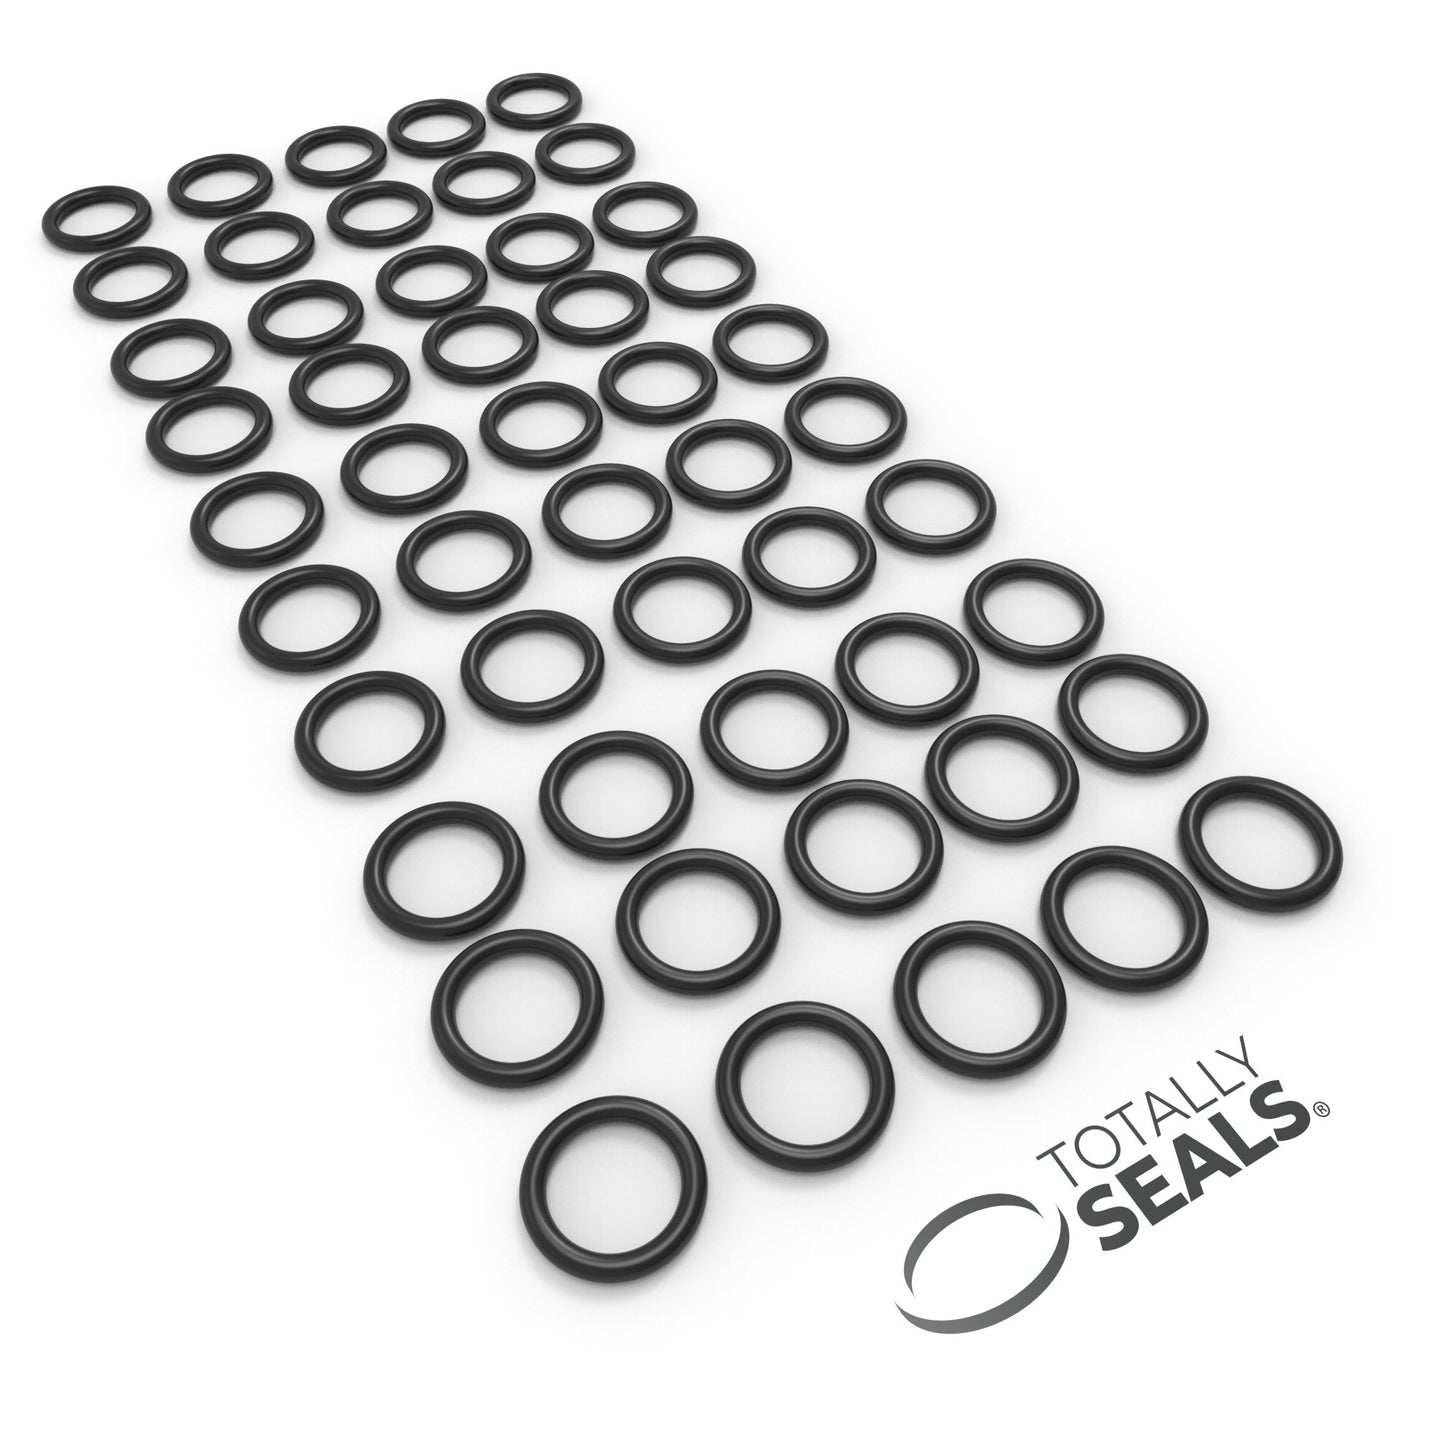 35mm x 3.5mm (42mm OD) Nitrile O-Rings - Totally Seals®